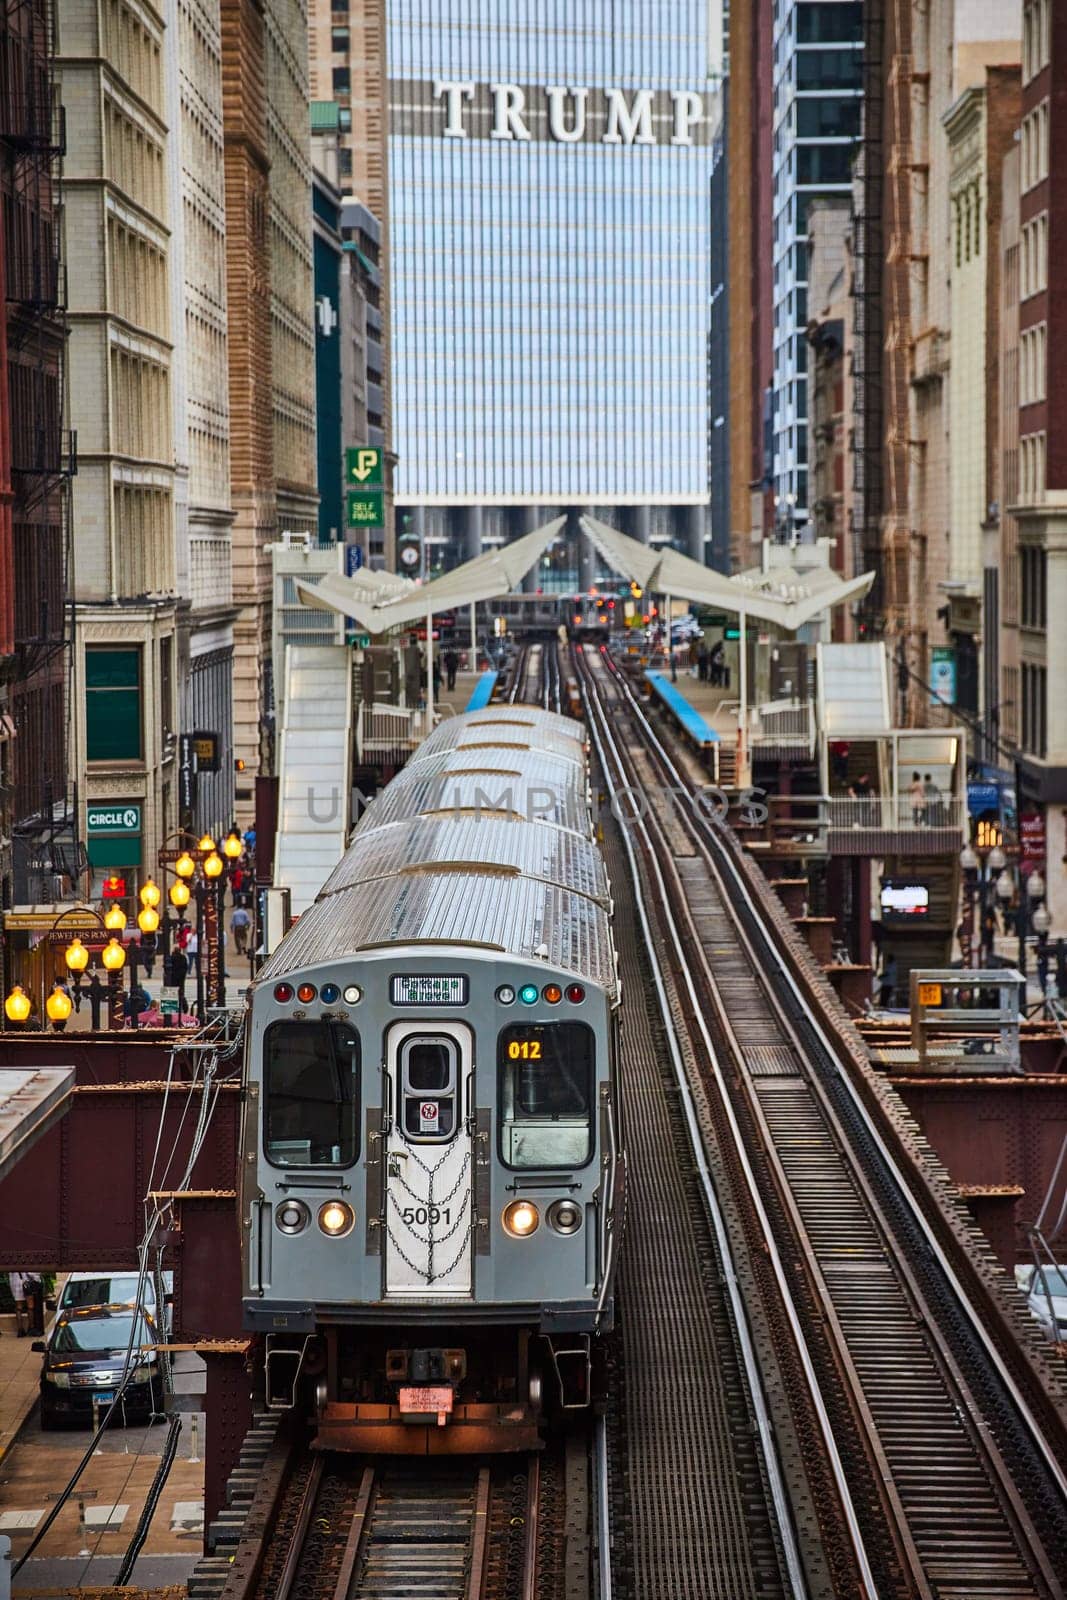 Elevated train traverses through historic downtown Chicago with Trump Tower looming in the backdrop, showcasing urban transportation and architectural contrast